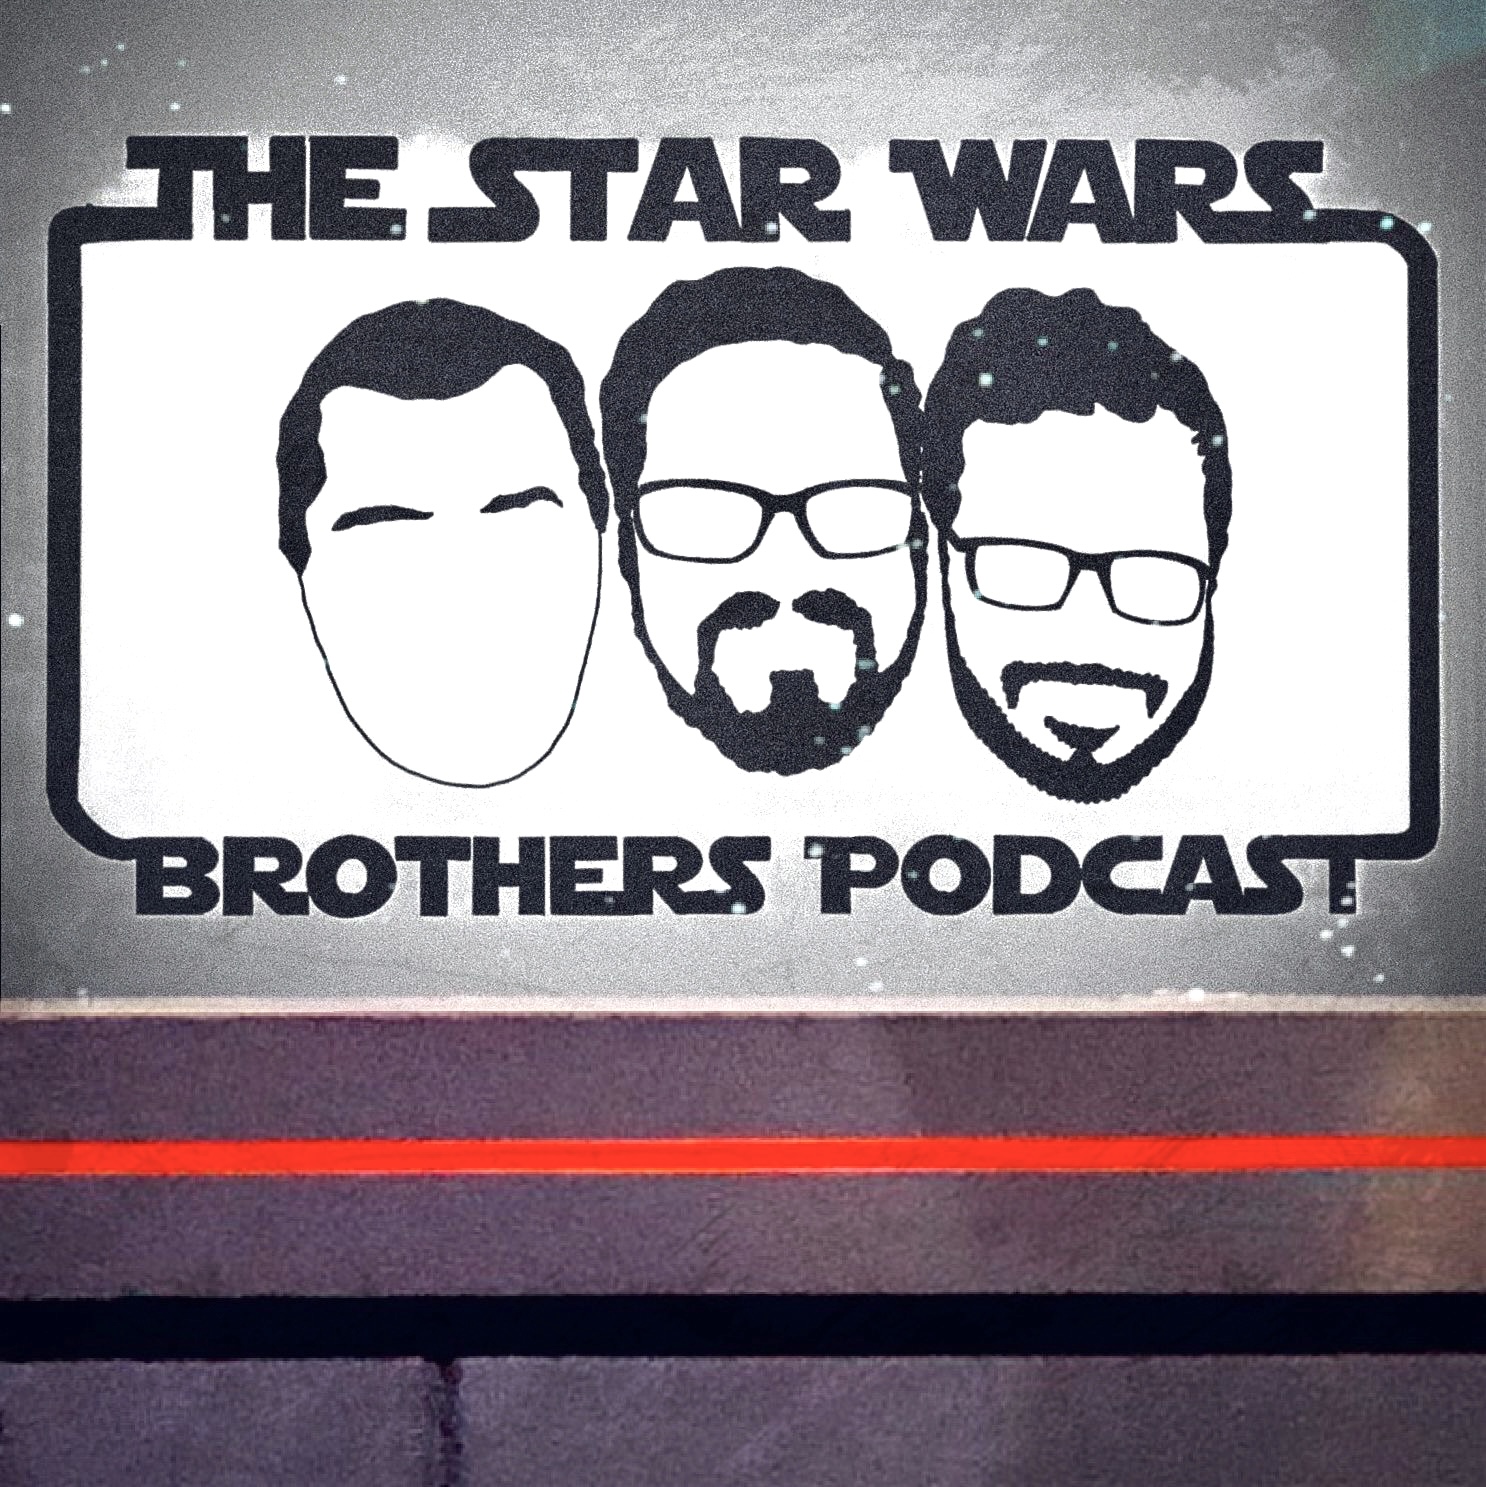 The Star Wars Brothers Podcast